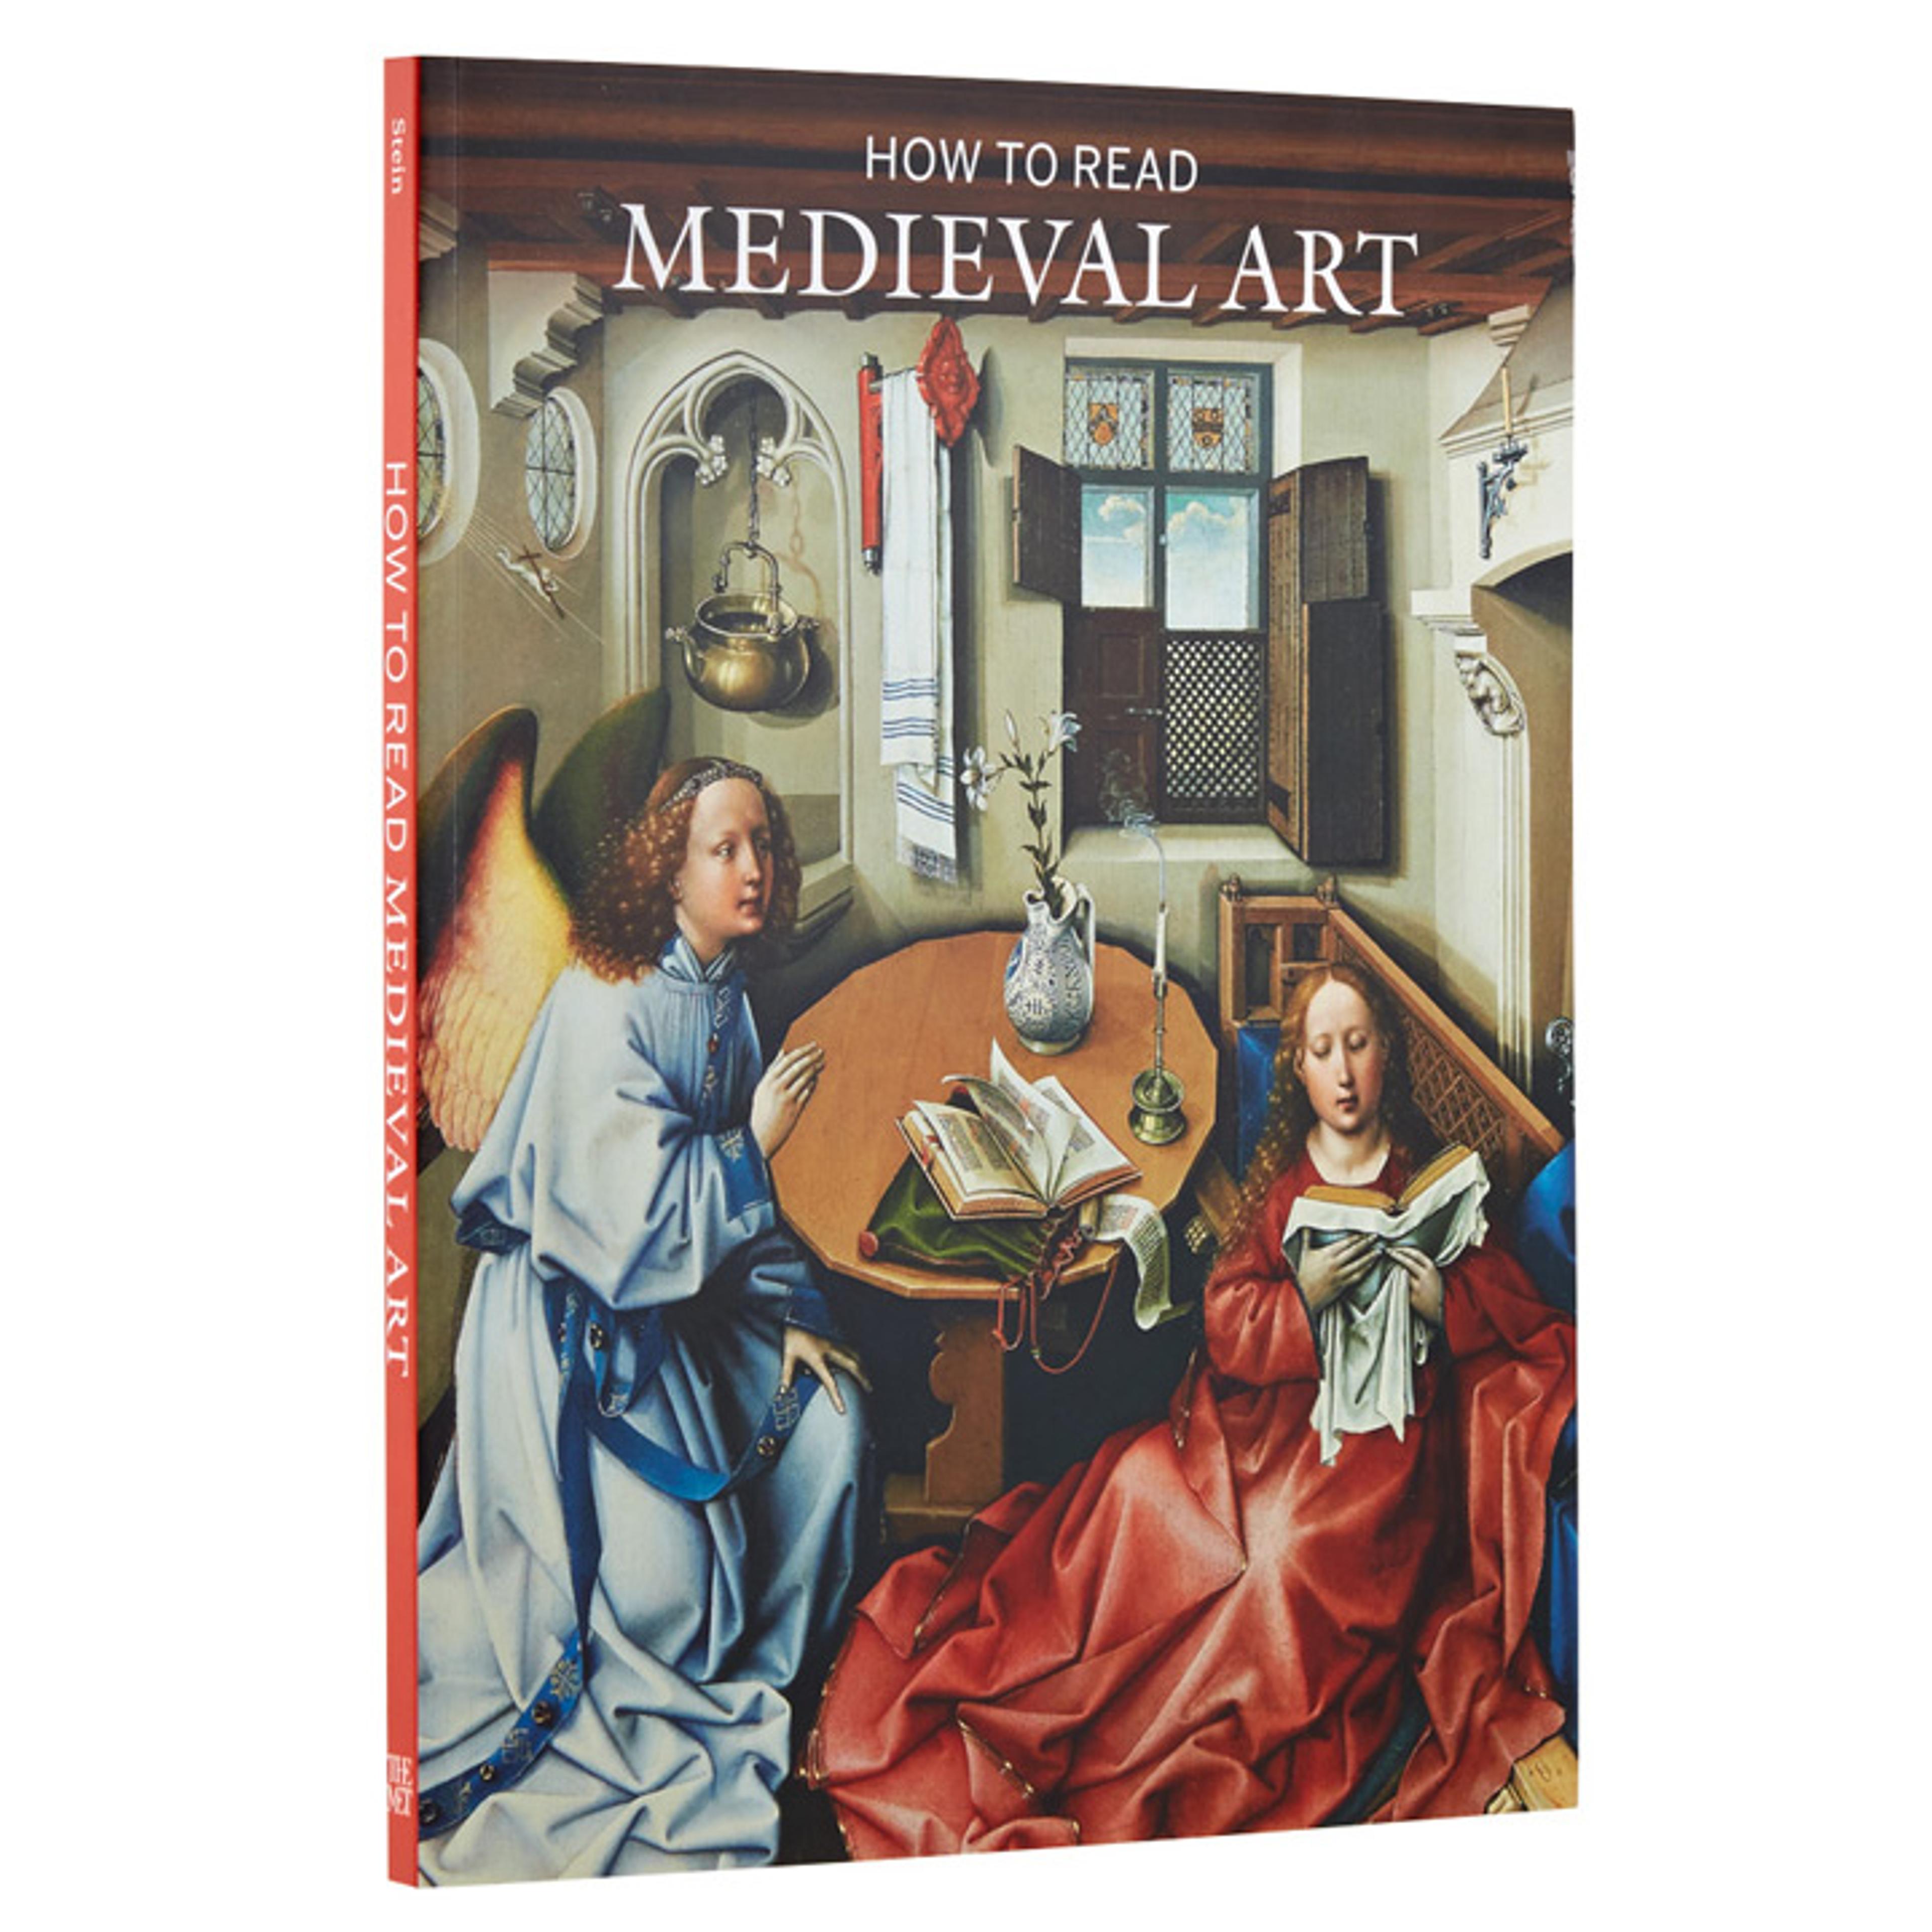 The cover of How to Read Medieval Art depicting the angle Gabriel in a white robe reaching toward Mary, who wears a red dress and sits on the ground